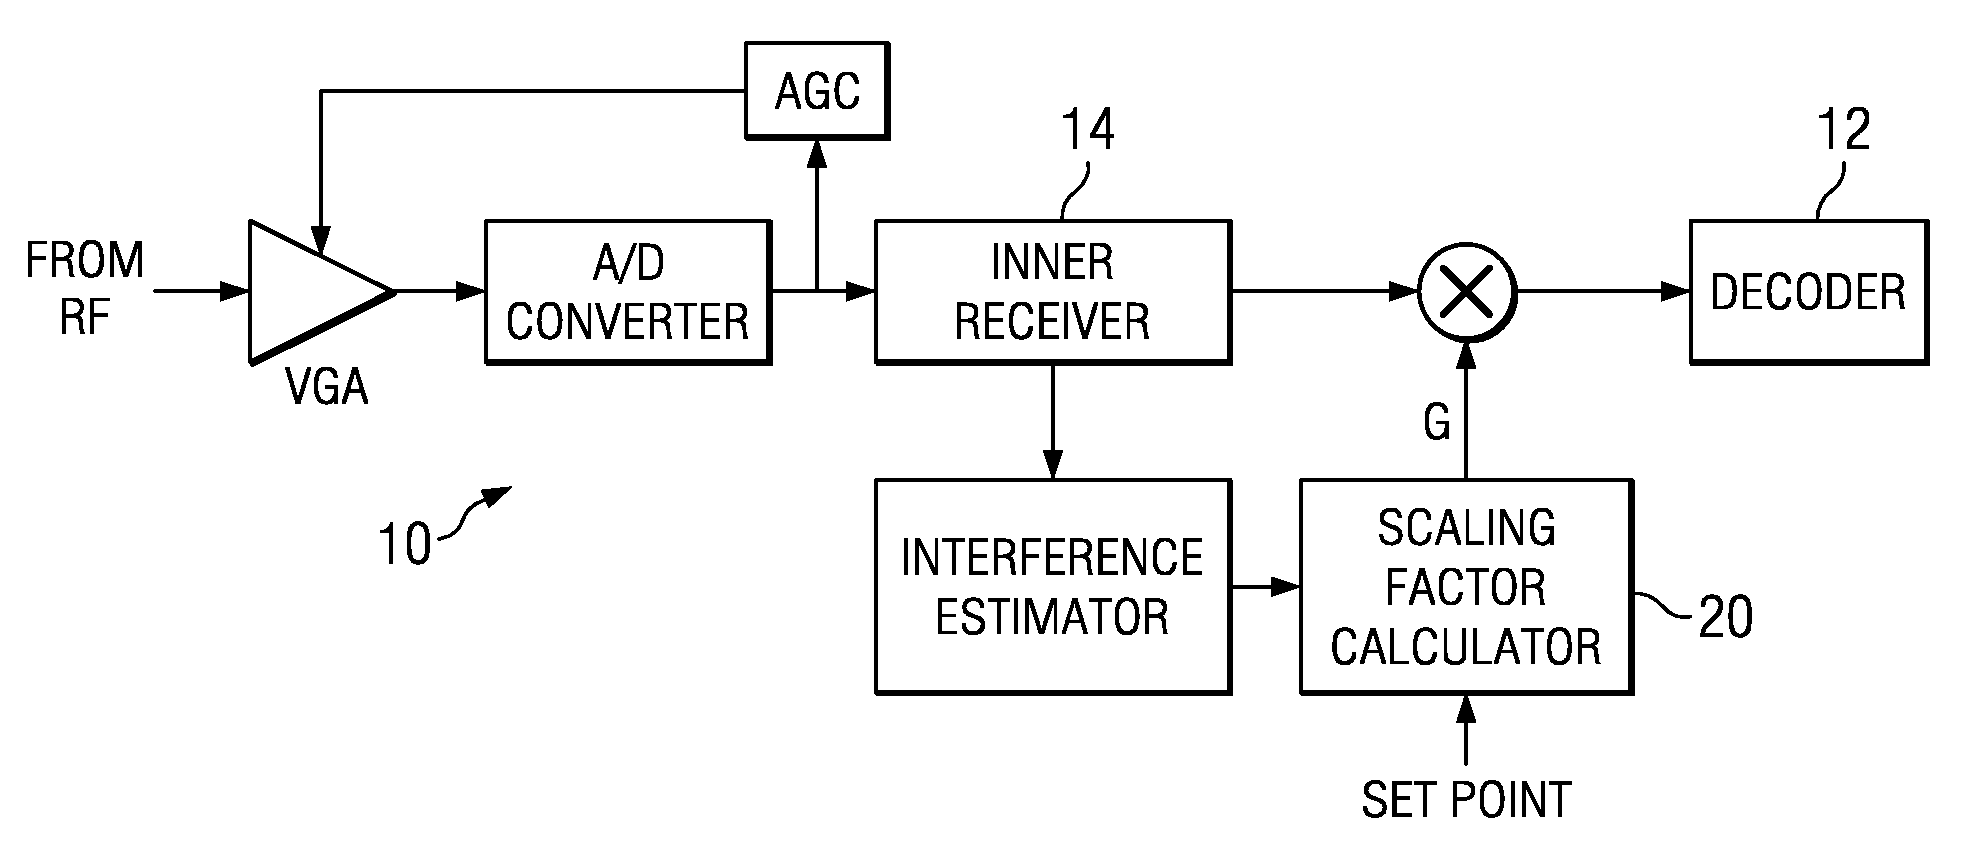 Method and apparatus for decoder input scaling based on interference estimation in CDMA